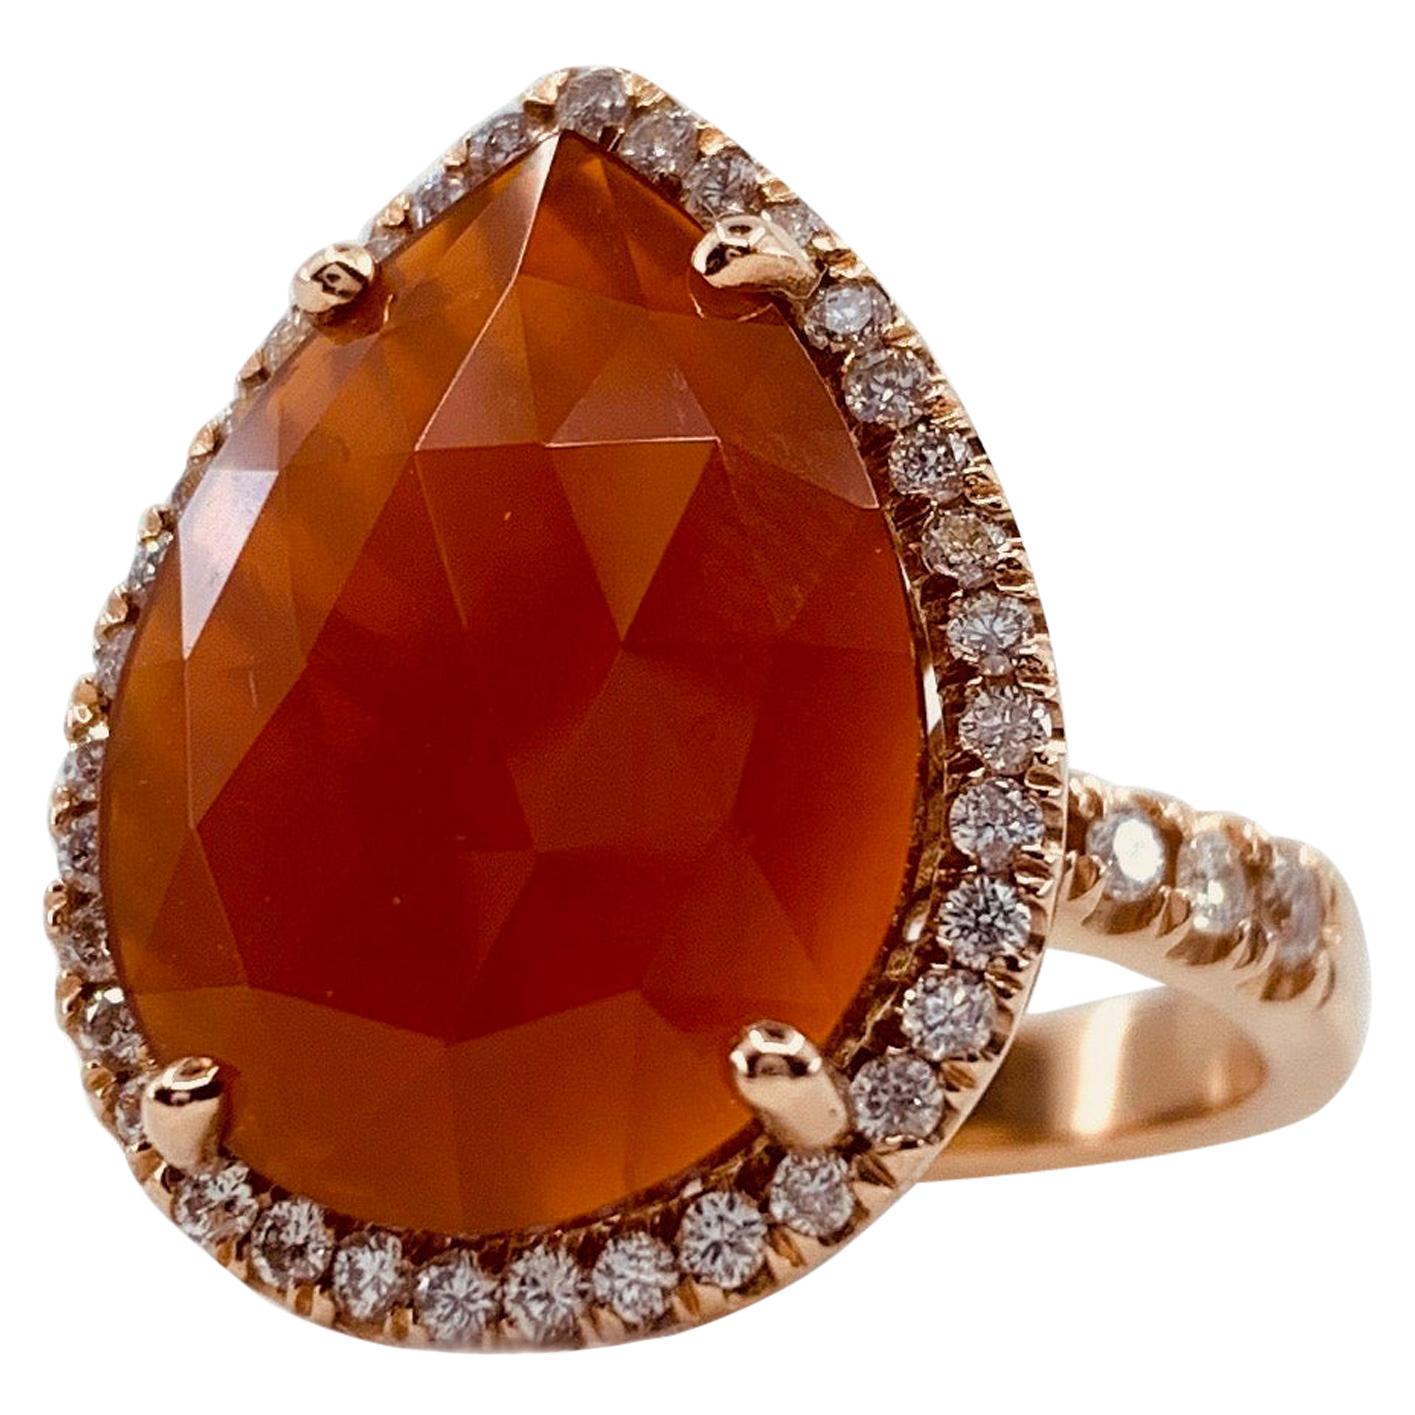 Contemporary Faceted 4.0 Carat Carnelian Slice Pear-Shaped Diamond Halo Ring in Rose Gold